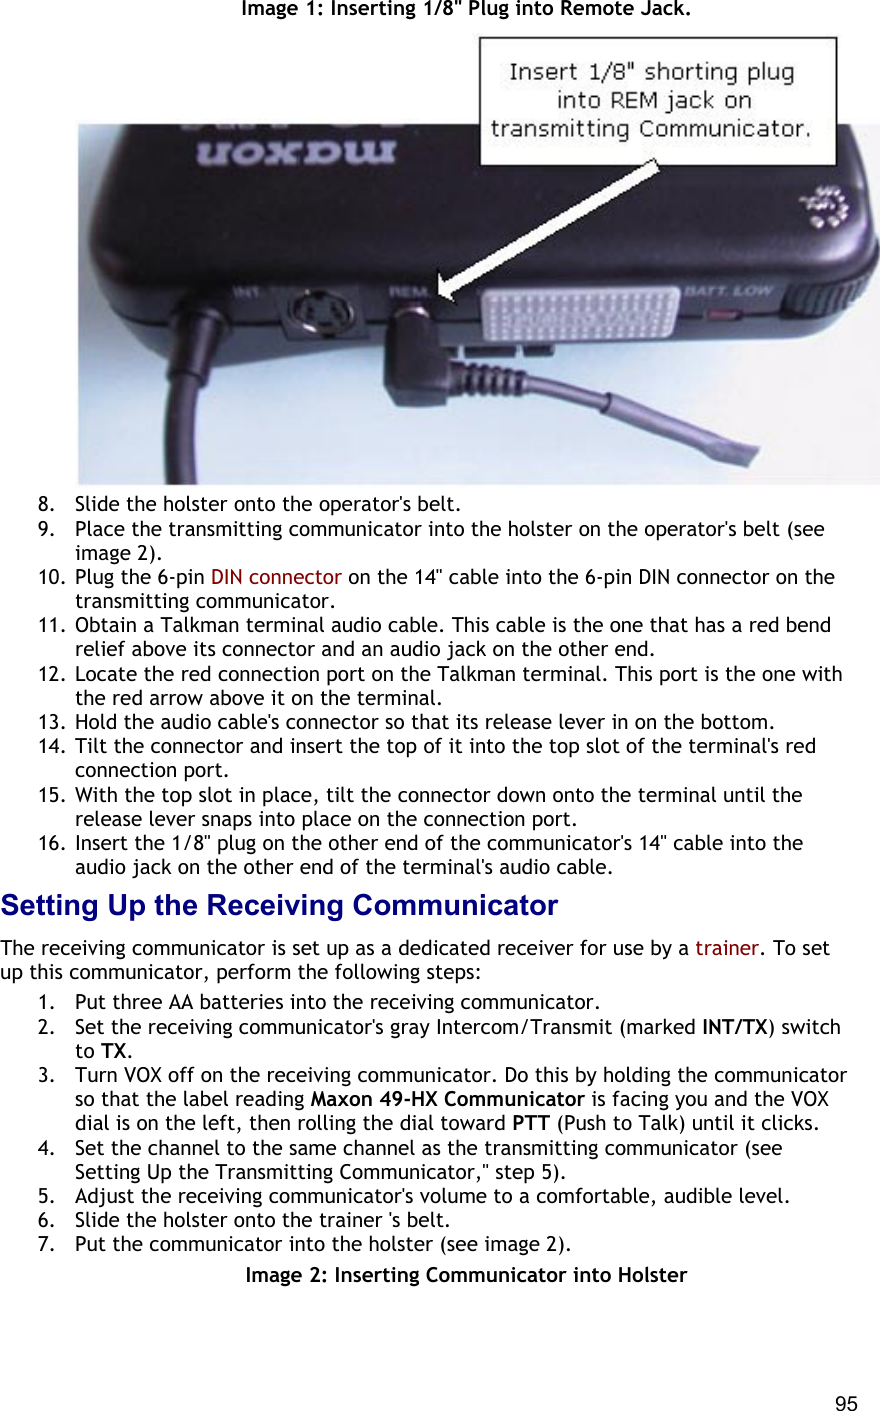  95 Image 1: Inserting 1/8&quot; Plug into Remote Jack.  8.  Slide the holster onto the operator&apos;s belt. 9.  Place the transmitting communicator into the holster on the operator&apos;s belt (see image 2).  10. Plug the 6-pin DIN connector on the 14&quot; cable into the 6-pin DIN connector on the transmitting communicator.  11. Obtain a Talkman terminal audio cable. This cable is the one that has a red bend relief above its connector and an audio jack on the other end. 12. Locate the red connection port on the Talkman terminal. This port is the one with the red arrow above it on the terminal. 13. Hold the audio cable&apos;s connector so that its release lever in on the bottom. 14. Tilt the connector and insert the top of it into the top slot of the terminal&apos;s red connection port. 15. With the top slot in place, tilt the connector down onto the terminal until the release lever snaps into place on the connection port. 16. Insert the 1/8&quot; plug on the other end of the communicator&apos;s 14&quot; cable into the audio jack on the other end of the terminal&apos;s audio cable. Setting Up the Receiving Communicator The receiving communicator is set up as a dedicated receiver for use by a trainer. To set up this communicator, perform the following steps: 1.  Put three AA batteries into the receiving communicator. 2.  Set the receiving communicator&apos;s gray Intercom/Transmit (marked INT/TX) switch to TX. 3.  Turn VOX off on the receiving communicator. Do this by holding the communicator so that the label reading Maxon 49-HX Communicator is facing you and the VOX dial is on the left, then rolling the dial toward PTT (Push to Talk) until it clicks. 4.  Set the channel to the same channel as the transmitting communicator (see Setting Up the Transmitting Communicator,&quot; step 5). 5.  Adjust the receiving communicator&apos;s volume to a comfortable, audible level. 6.  Slide the holster onto the trainer &apos;s belt. 7.  Put the communicator into the holster (see image 2). Image 2: Inserting Communicator into Holster 